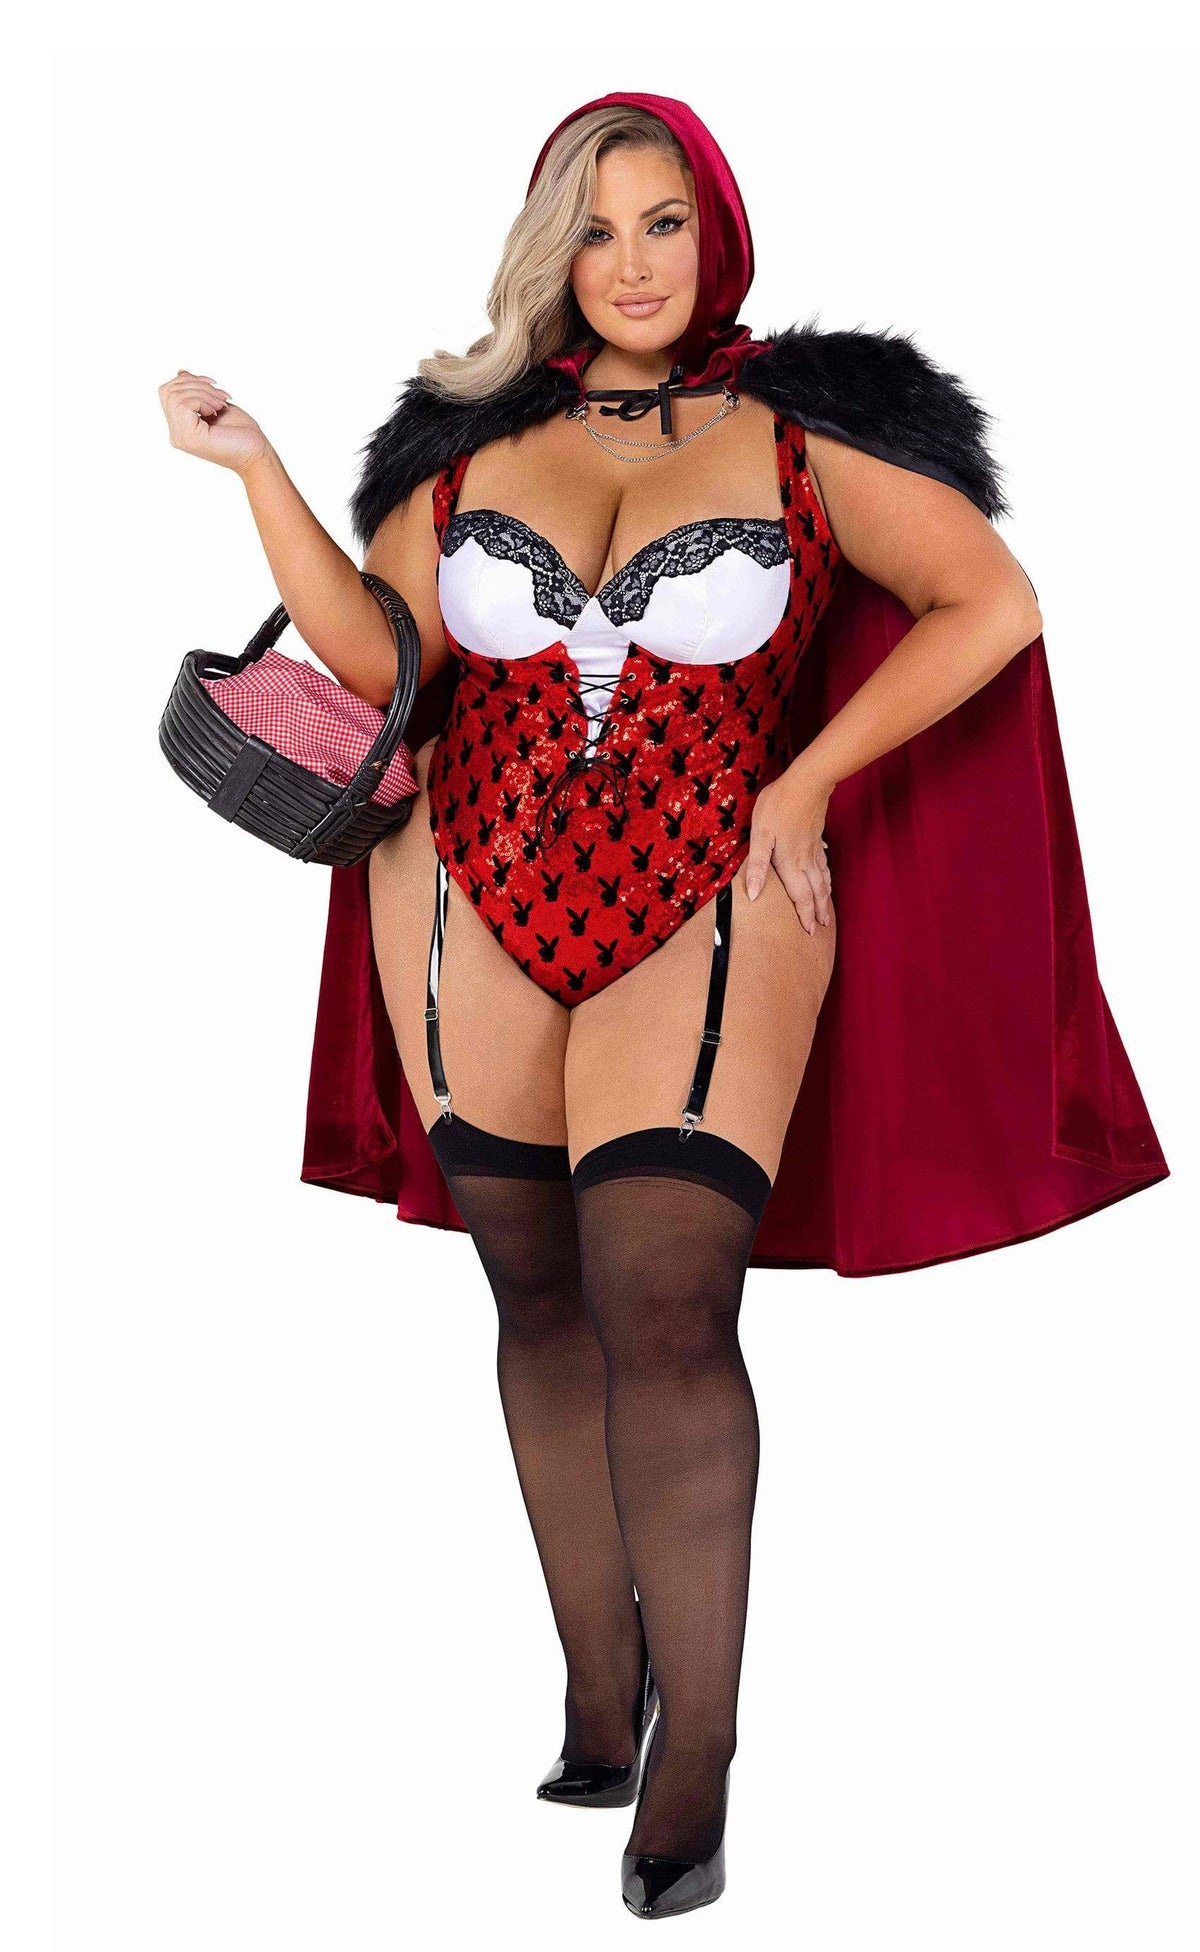 Roma Costume 1X / Black/Red PB117 - 2pc Playboy Enchanted Forest PB117-Blk/Red-1X